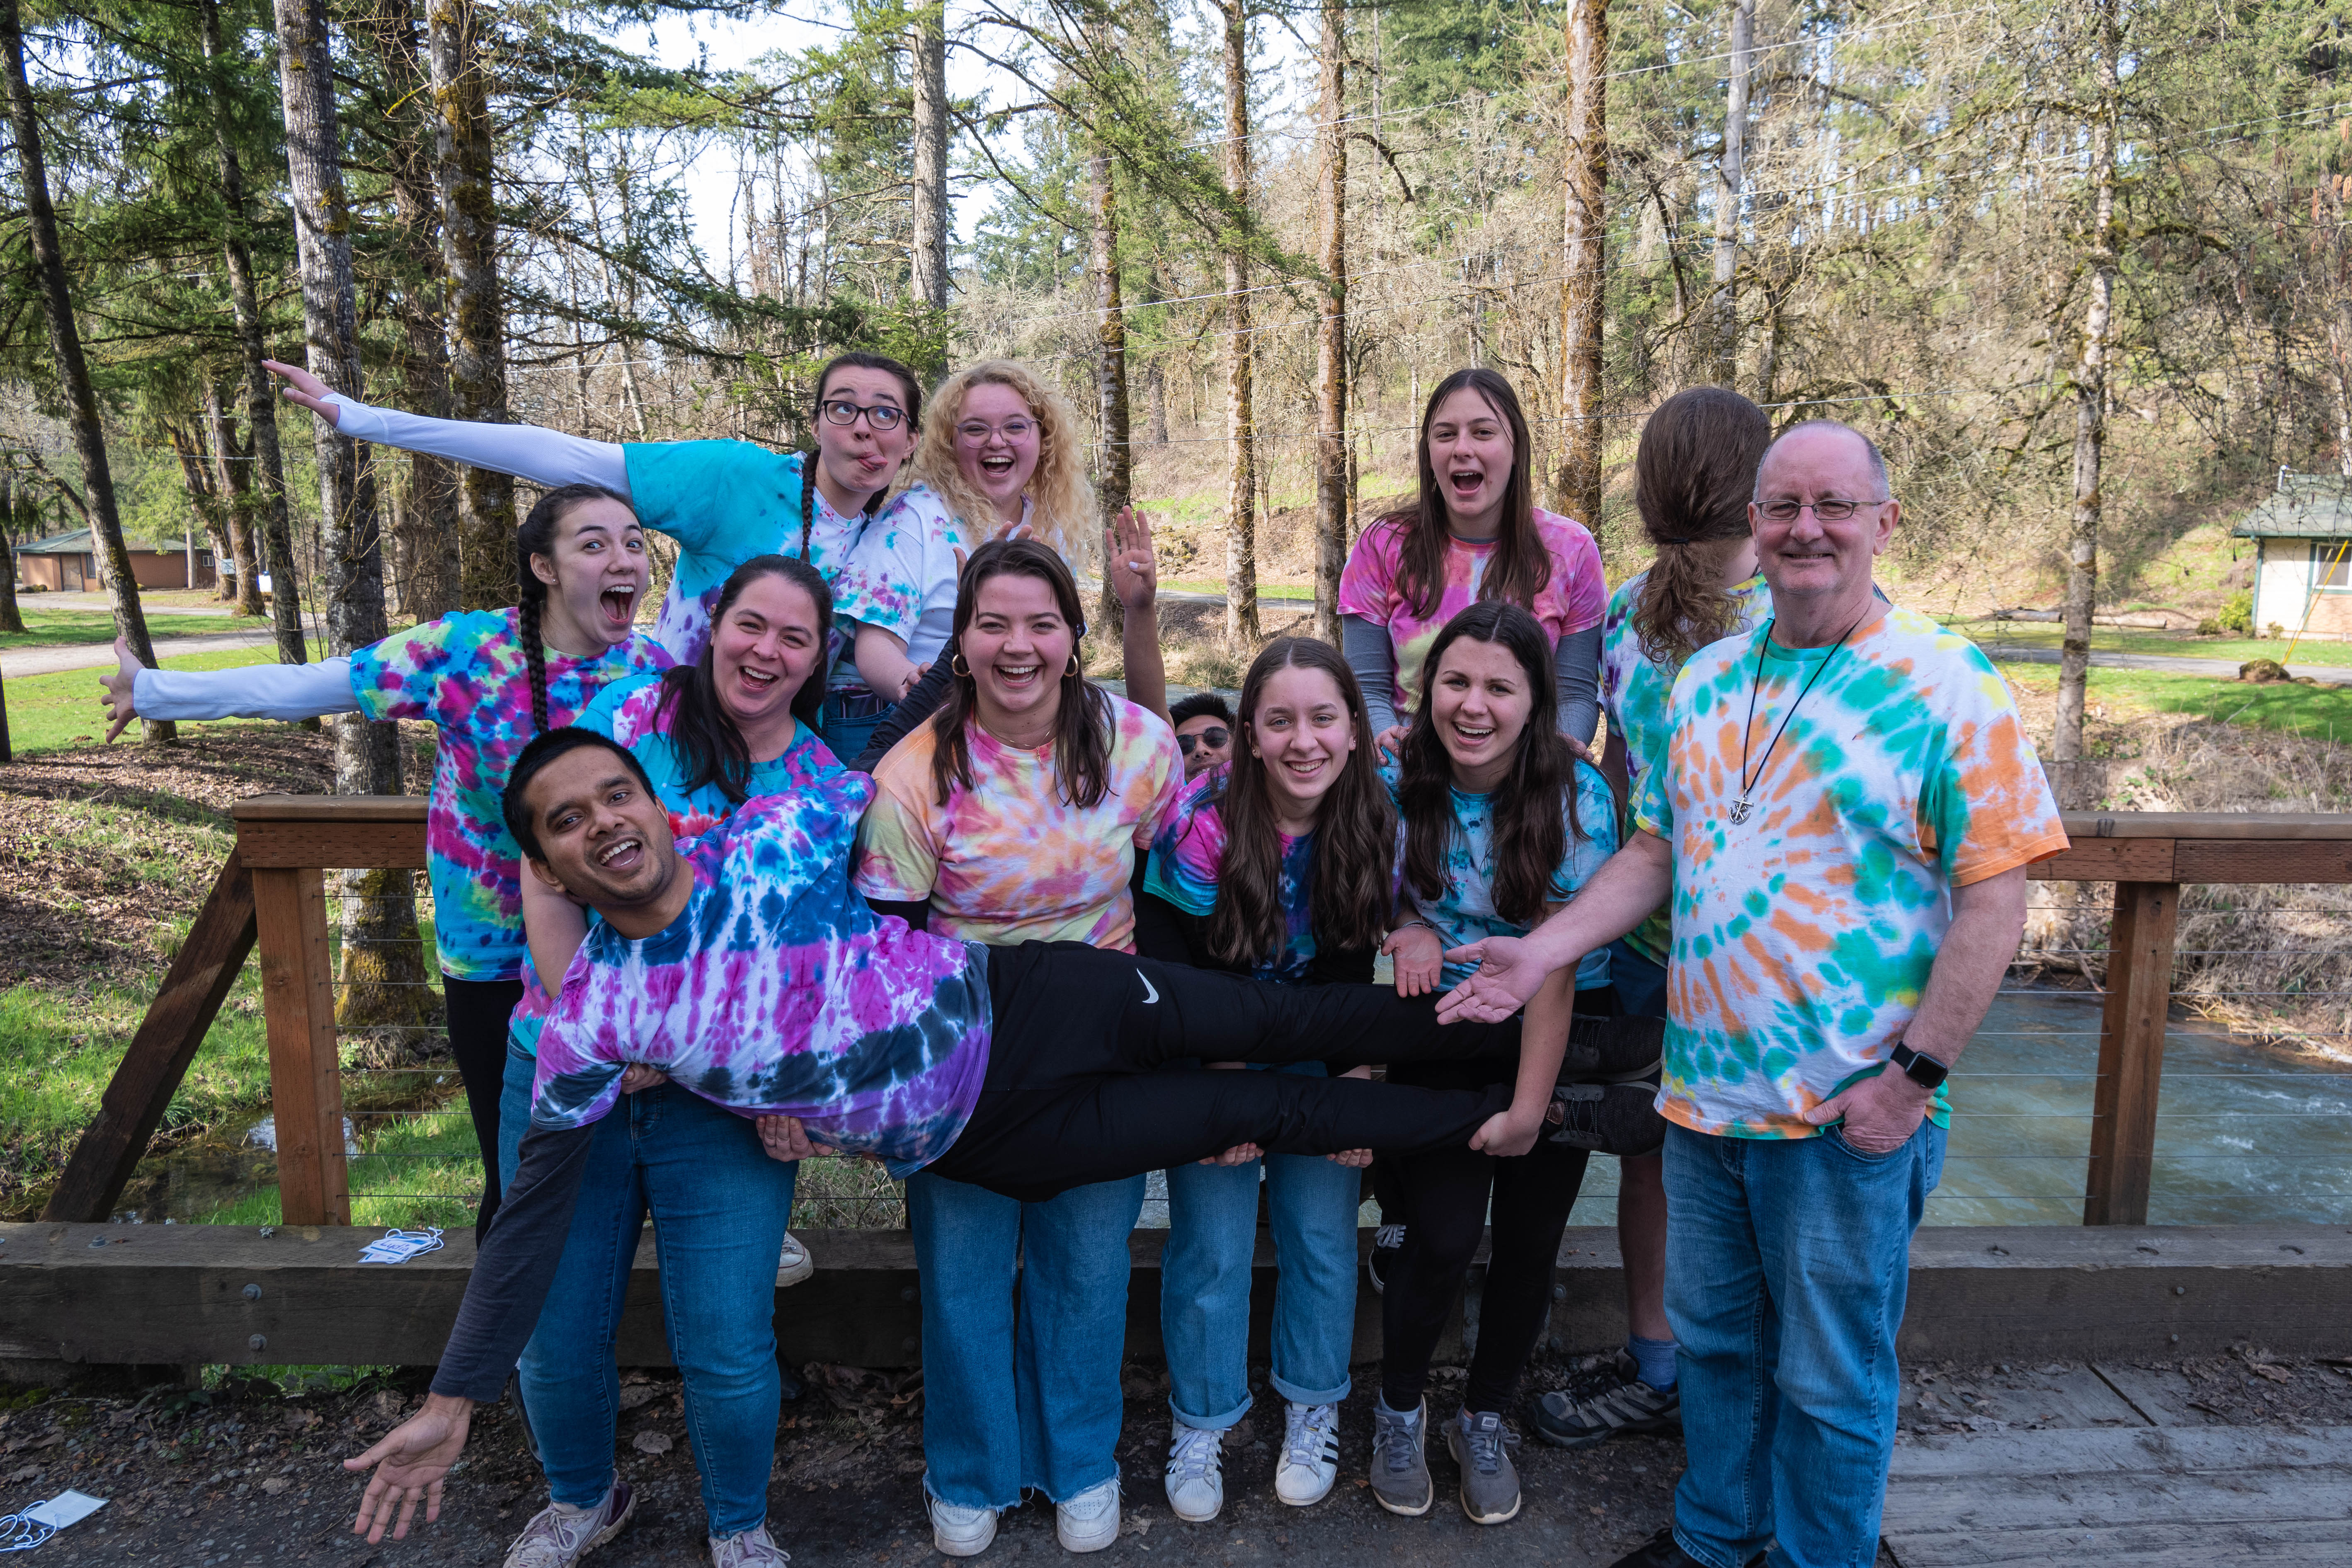 The Spes Unica Retreat Team poses for a photo on a bridge at the retreat site in tie-dyed t-shirts.